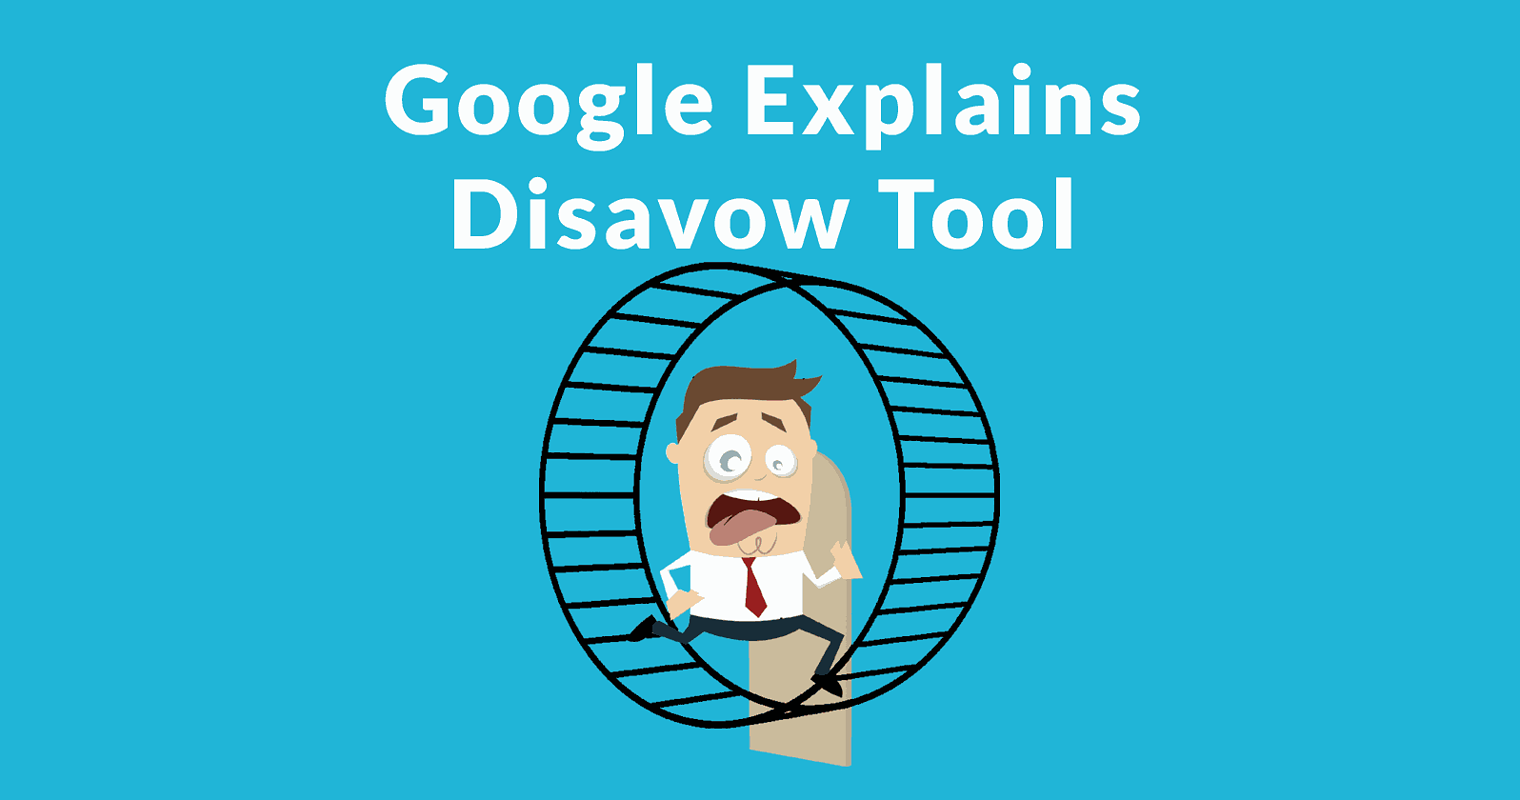 Google Discourages Use of Disavow Tool. Unless You Know the Bad Links